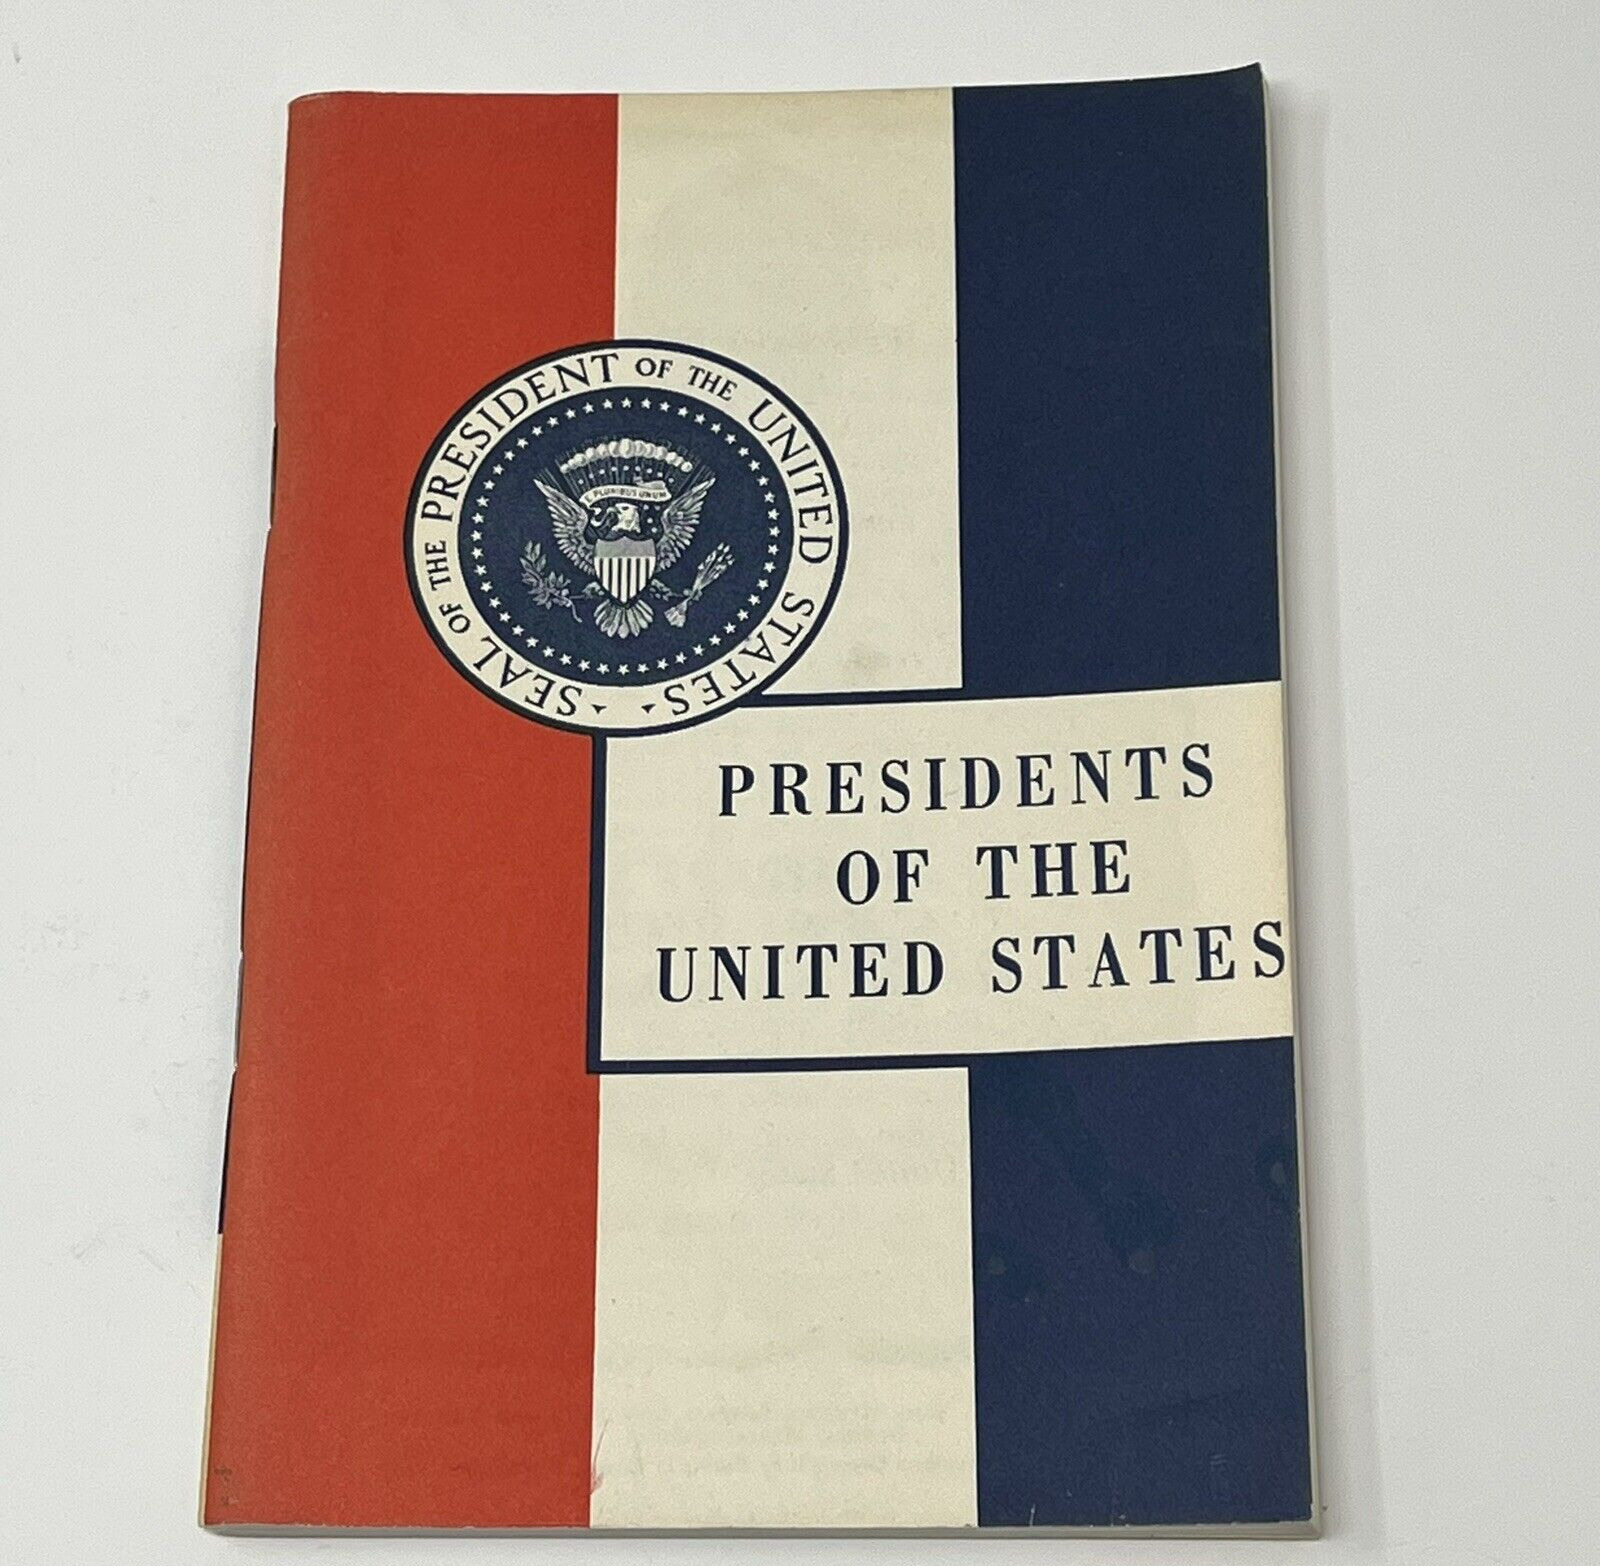 1962 Presidents Of The United States John Hancock Mutual Life Insurance Booklet